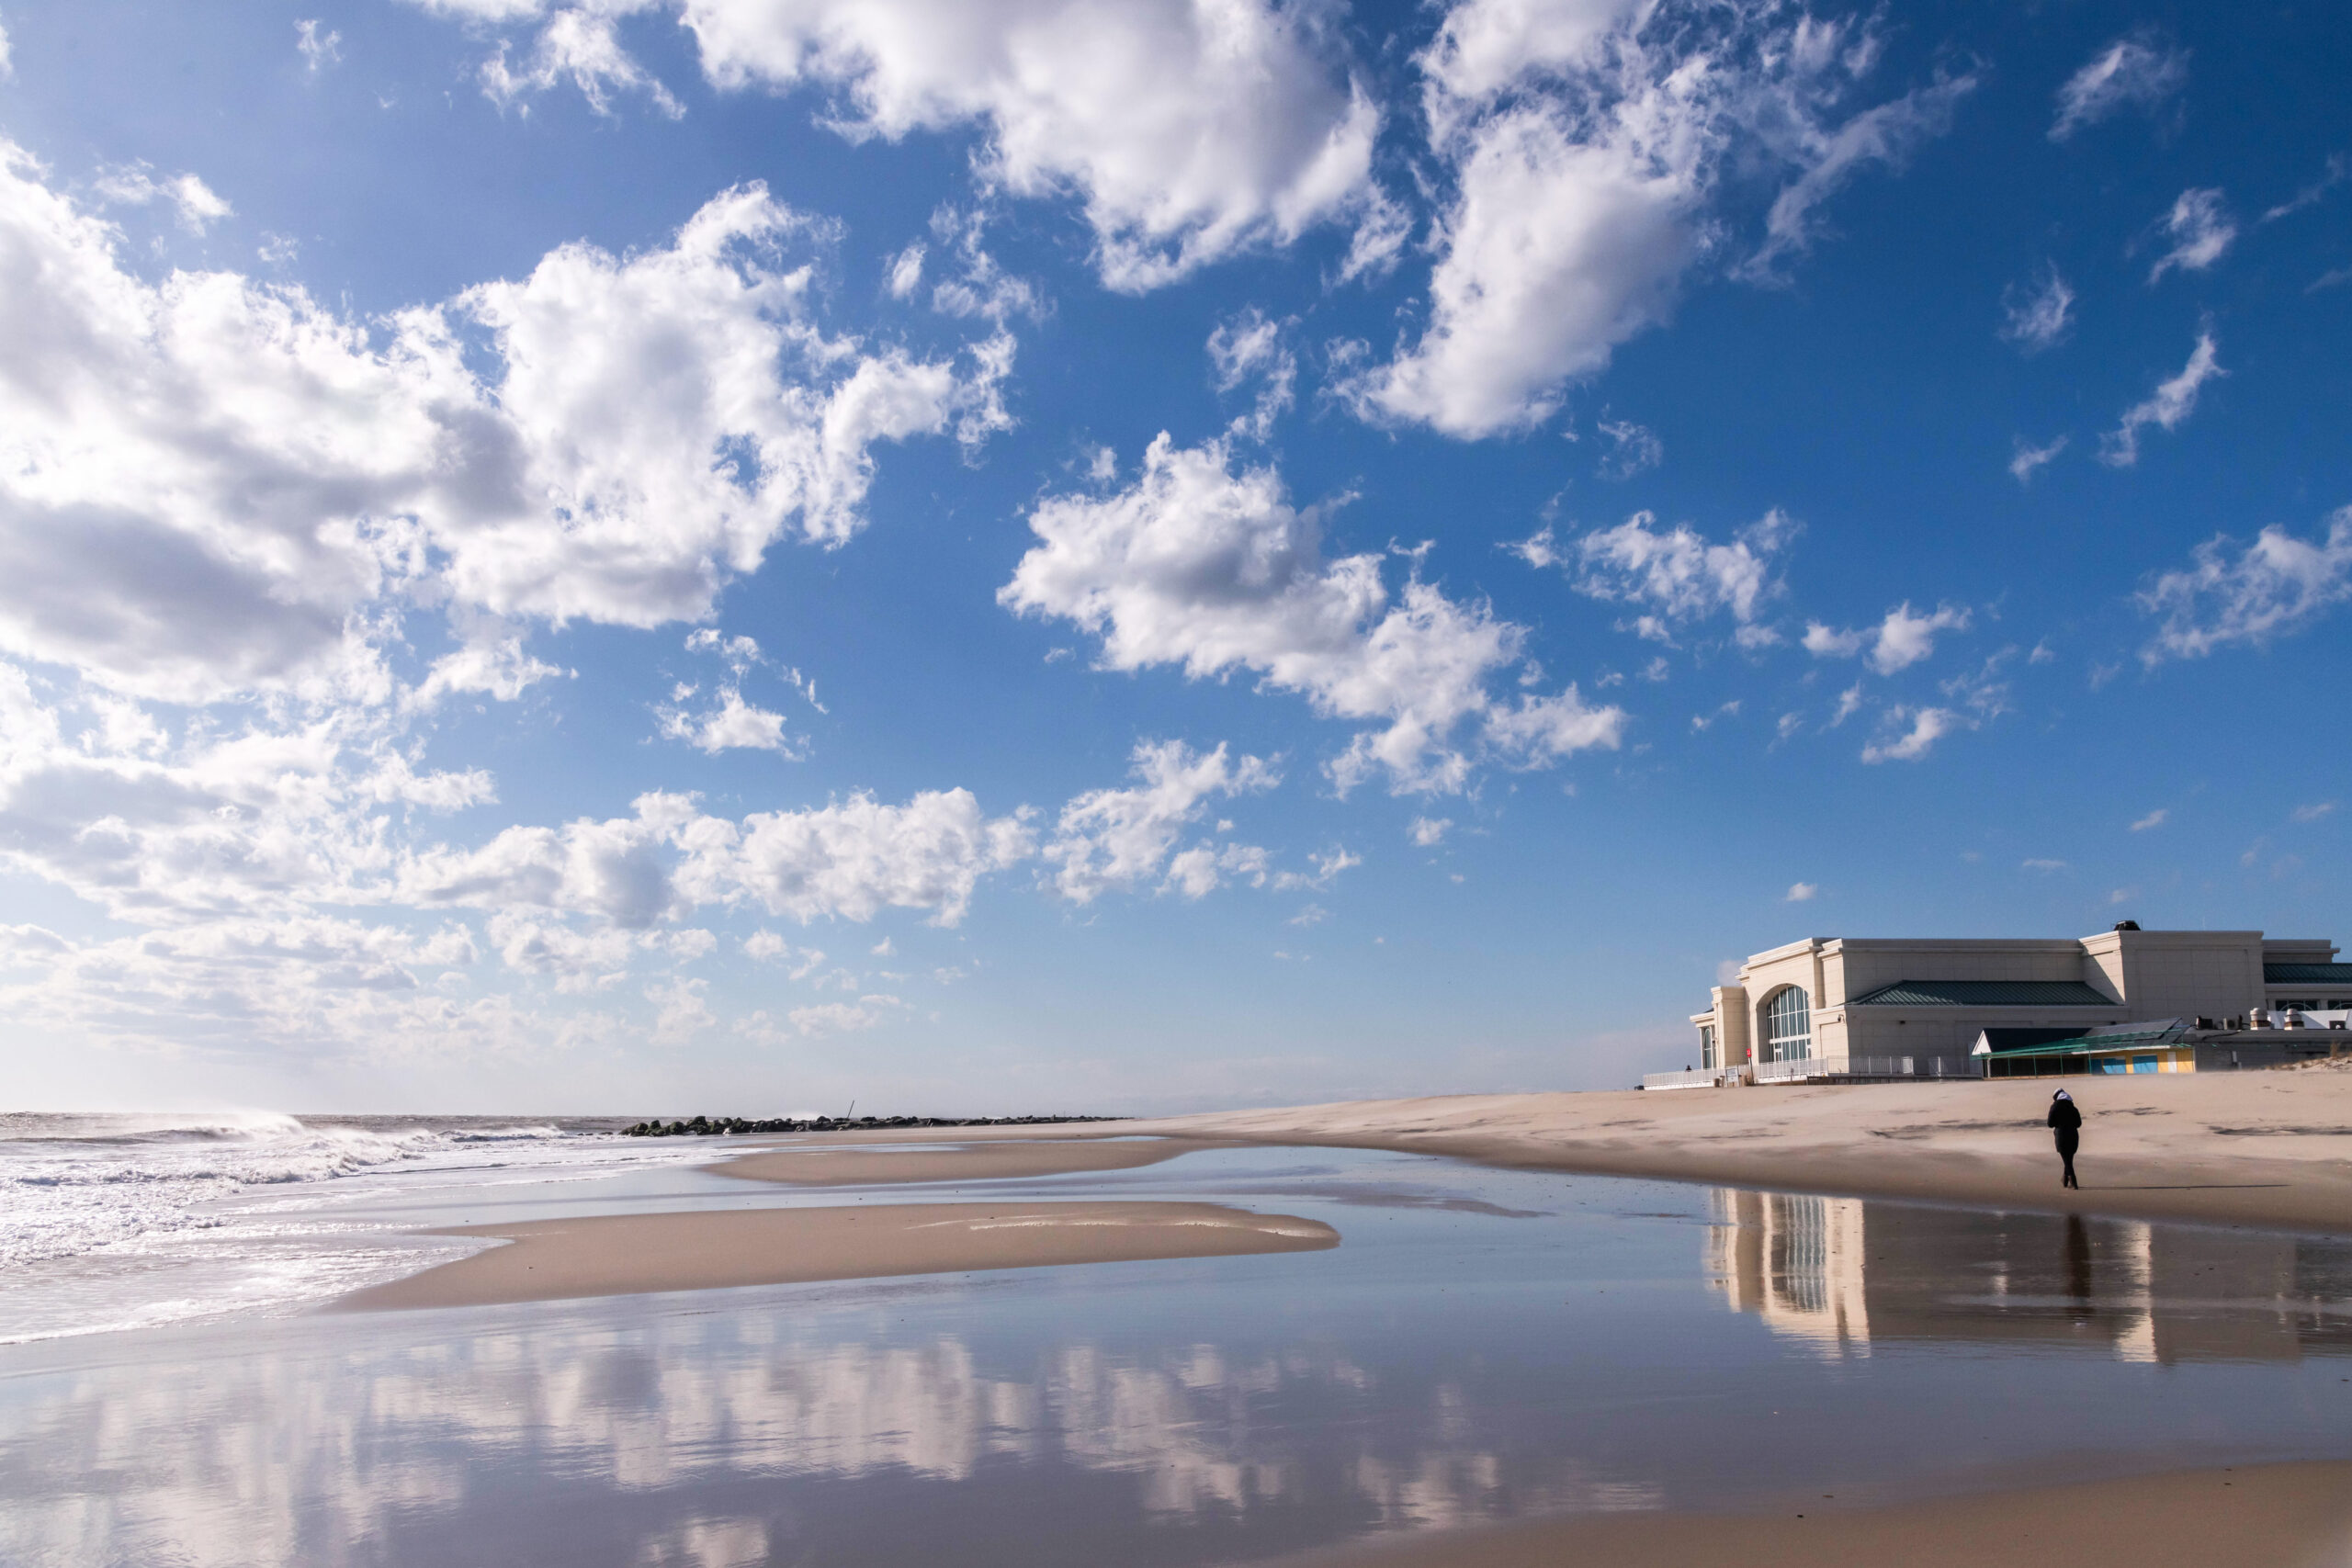 Convention Hall and the blue sky with puffy white clouds reflected in the ocean and sand